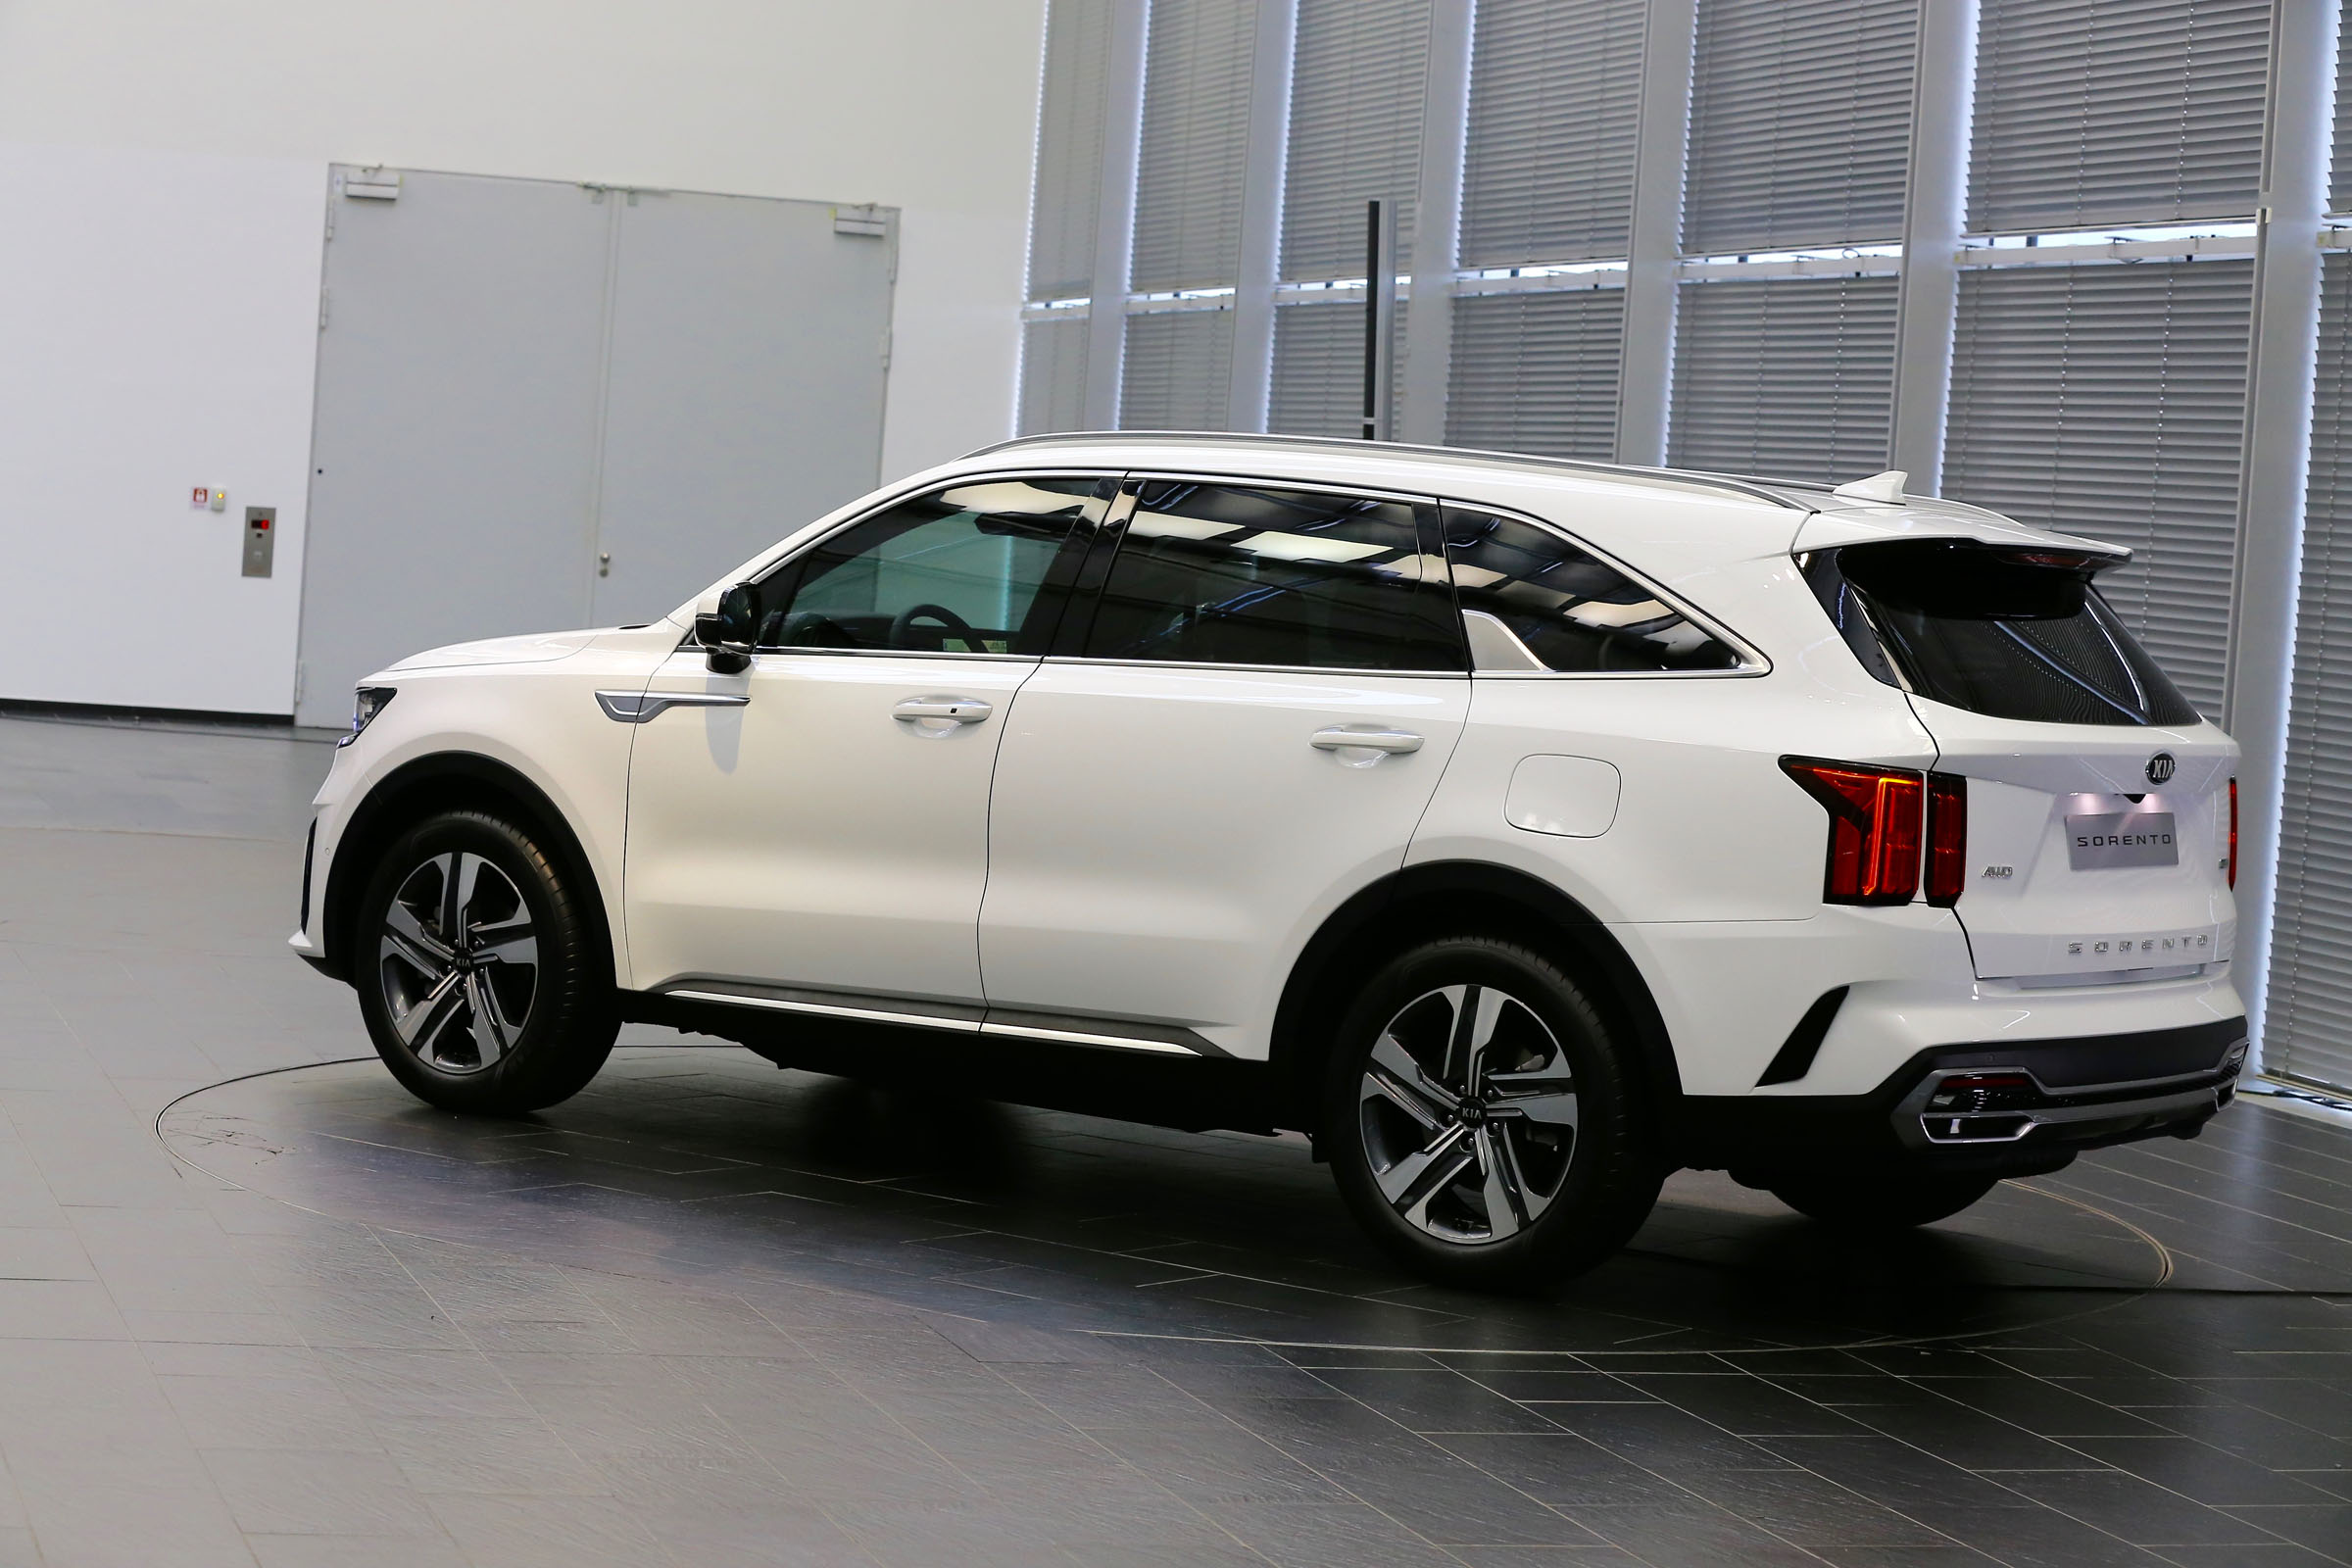 New 2020 Kia Sorento hybrid prices, specifications and onsale date